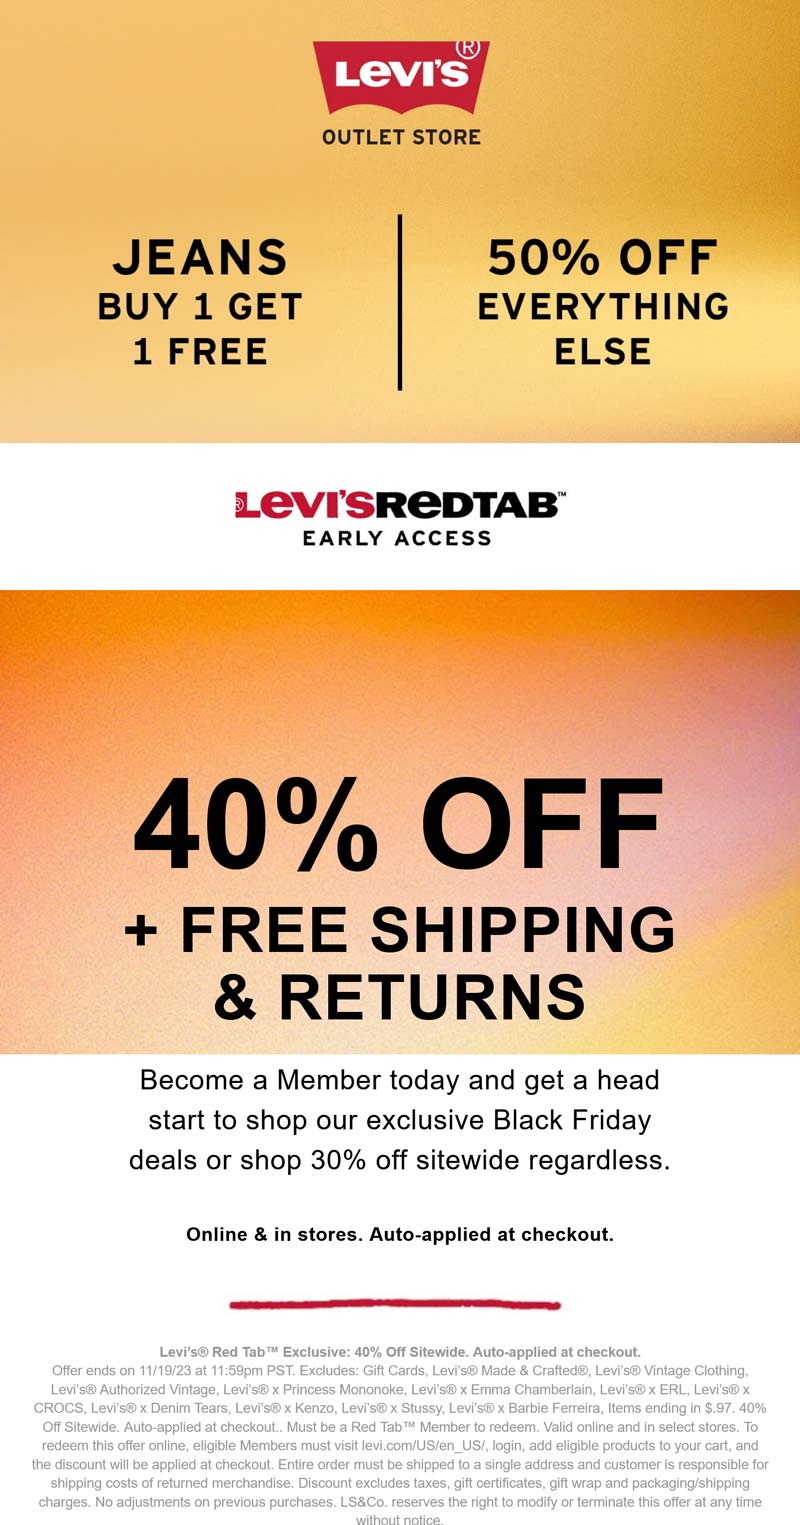 Second jeans free & 50% off everything at Levis Outlet Store #levisoutletstore